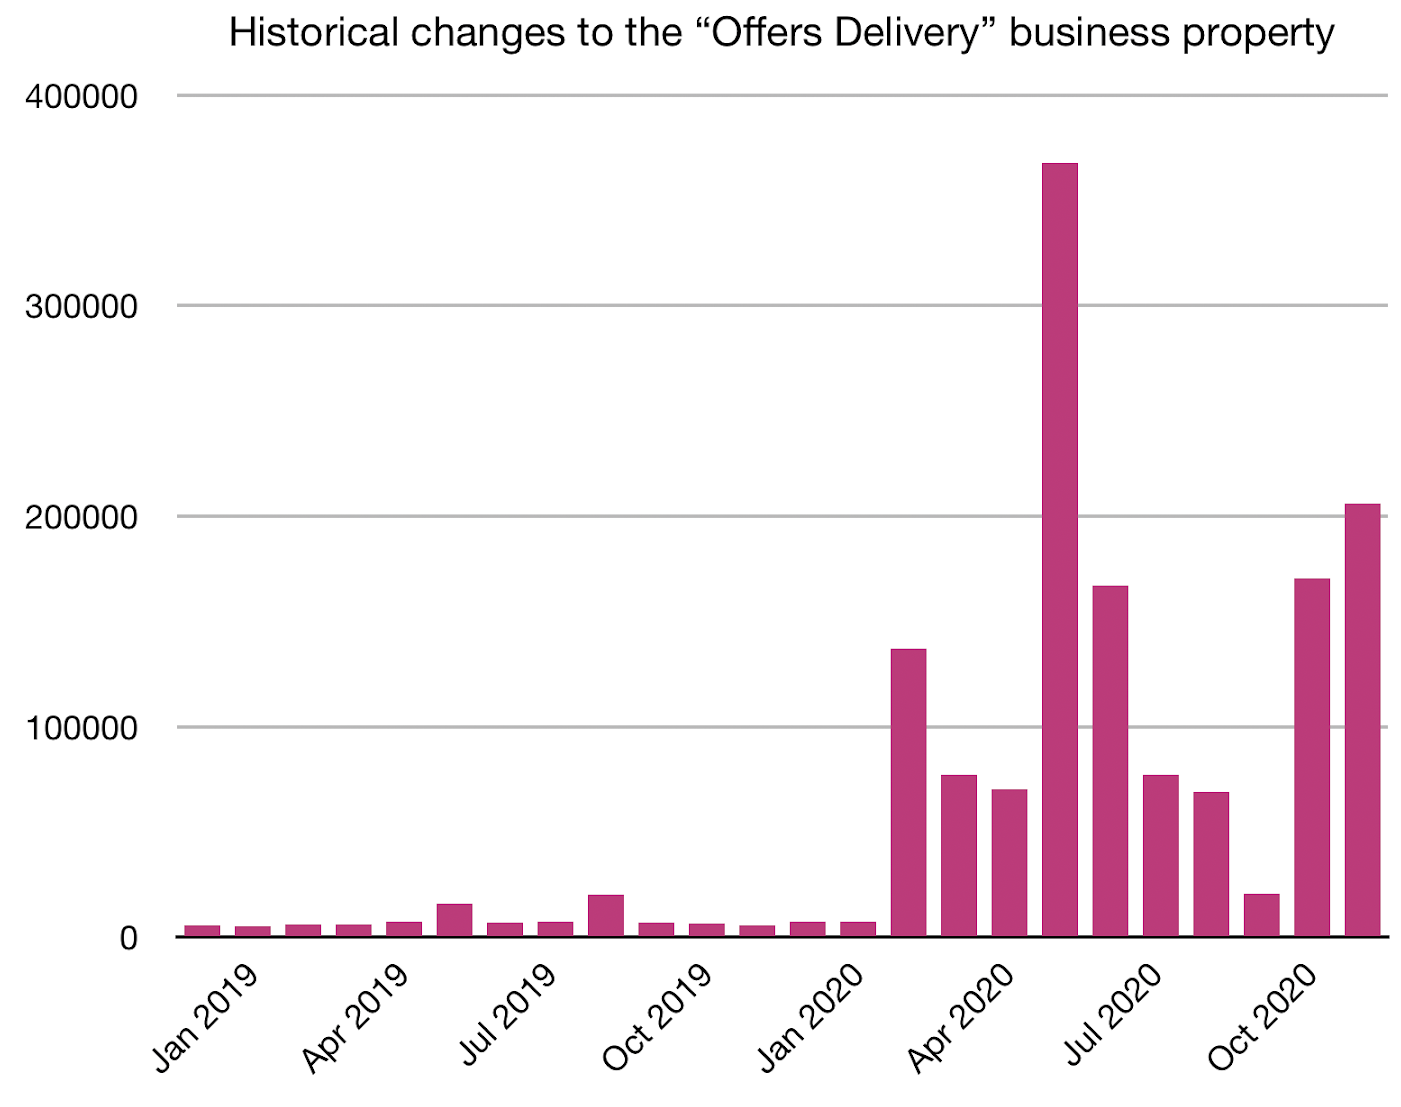 Changes to the 'Offers Delivery' property during 2020